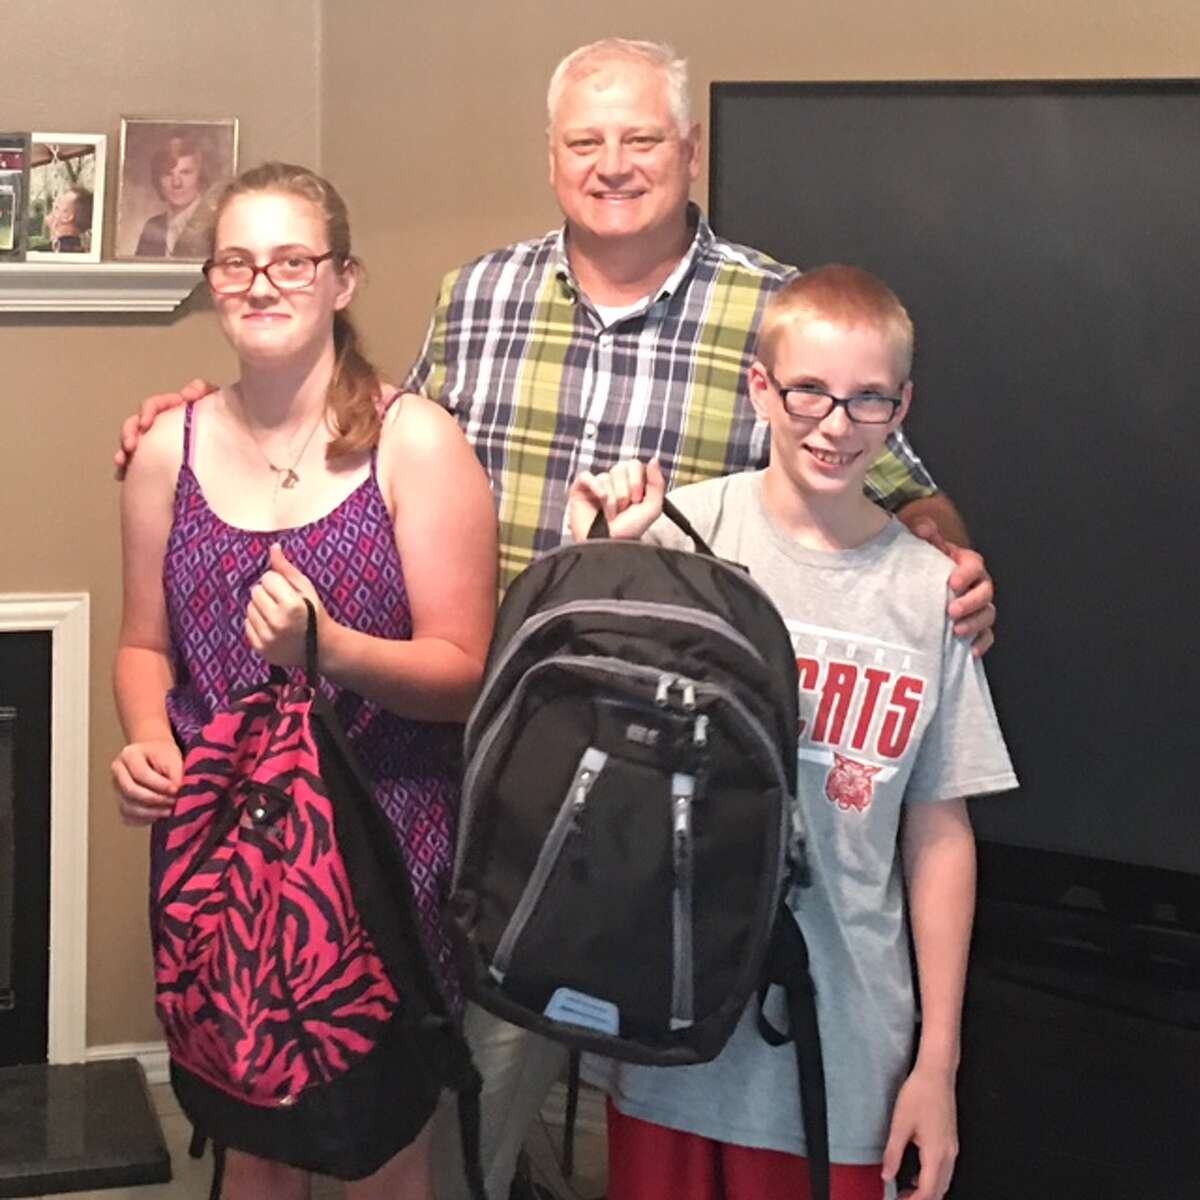 Lion Scott Perry, center, delivers backpacks full of goodies from the Conroe Noon Lions Club, to Amber, left, and Carson Free as they head off for a week long camping session at Texas Lions Camp in Kerrville, Texas.